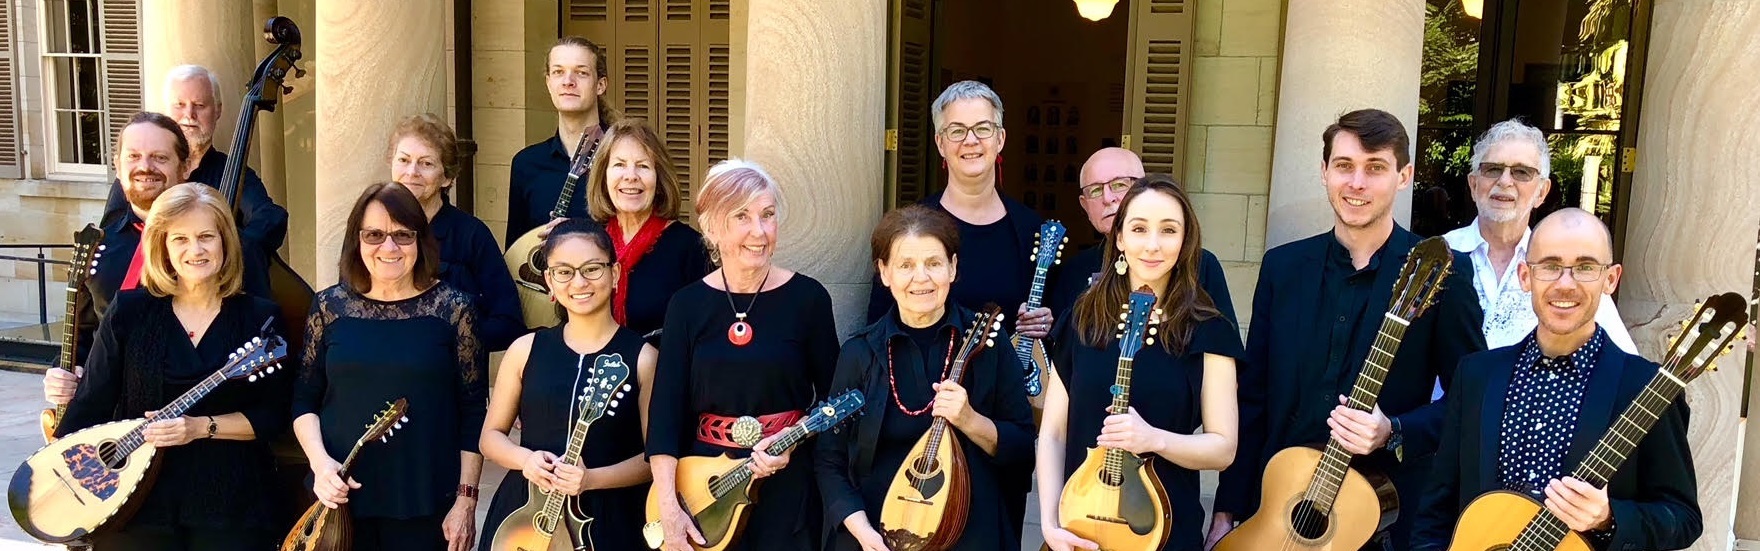 Let the Mandolins in Brisbane take you on a journey from the Old World to the New, with music from the Netherlands and Australia featuring ‘The Adventures of Duyfken’ by Richard Charlton.